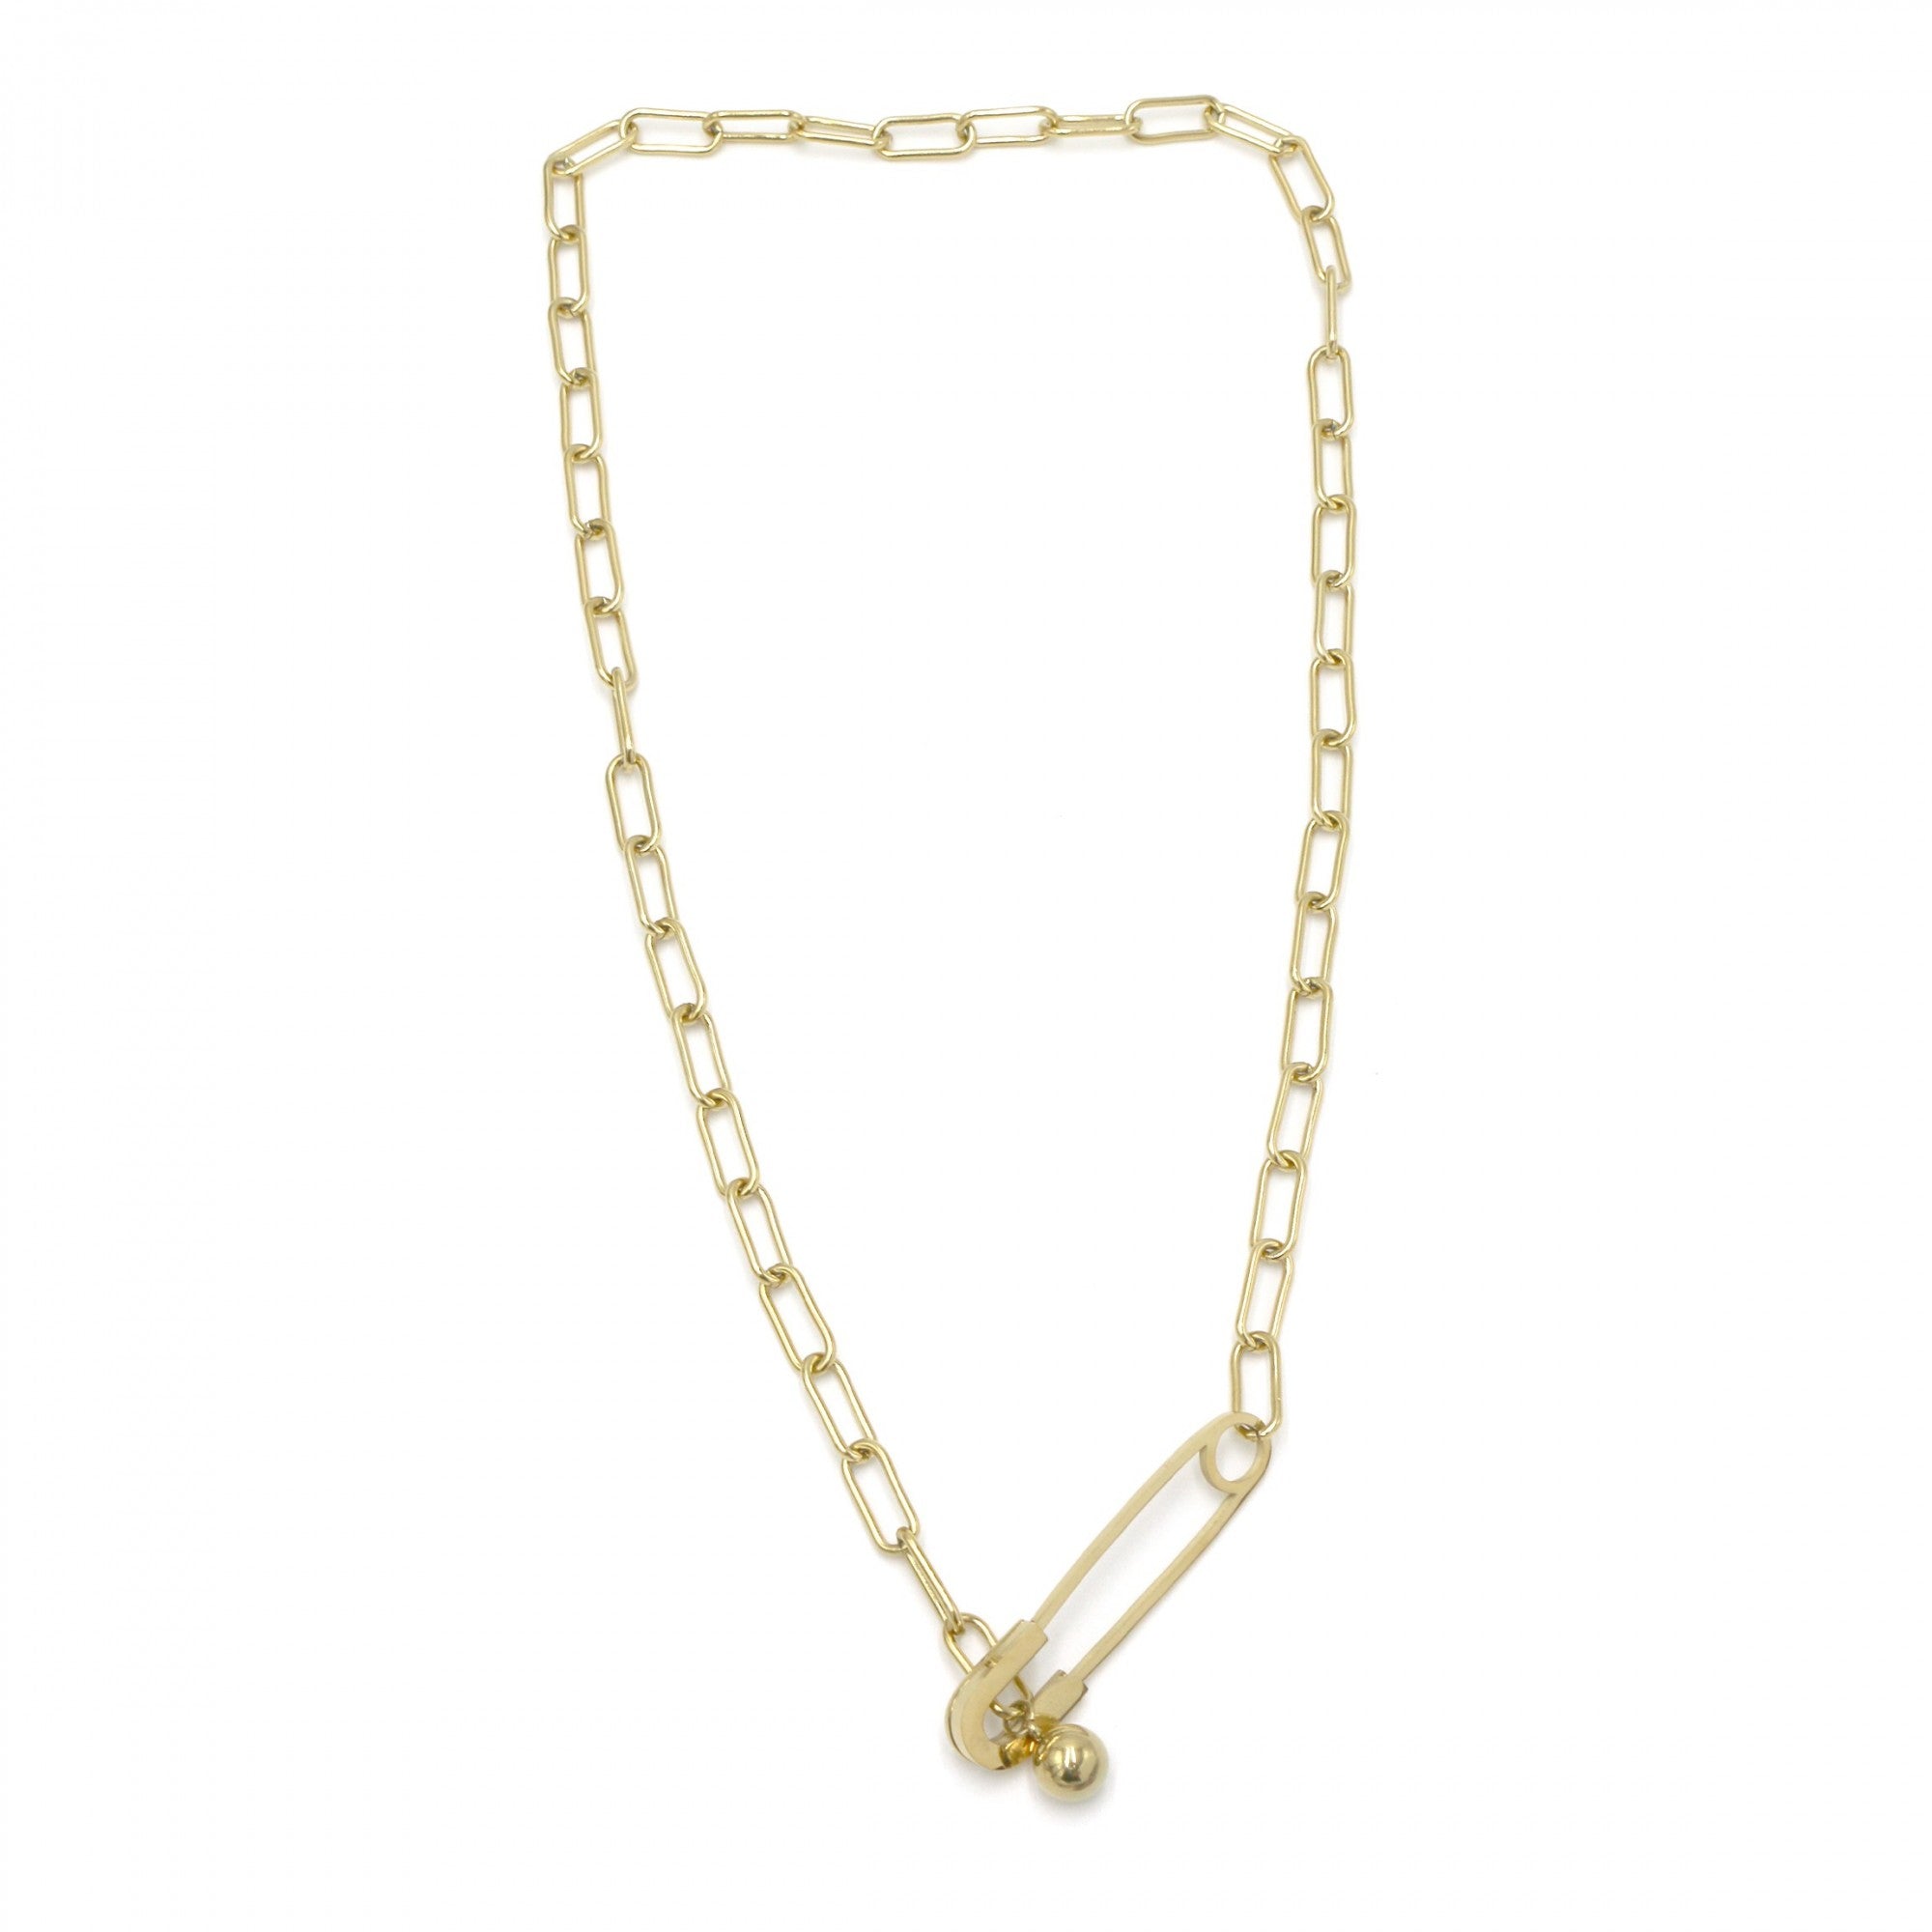 Golden hairpin link long necklace